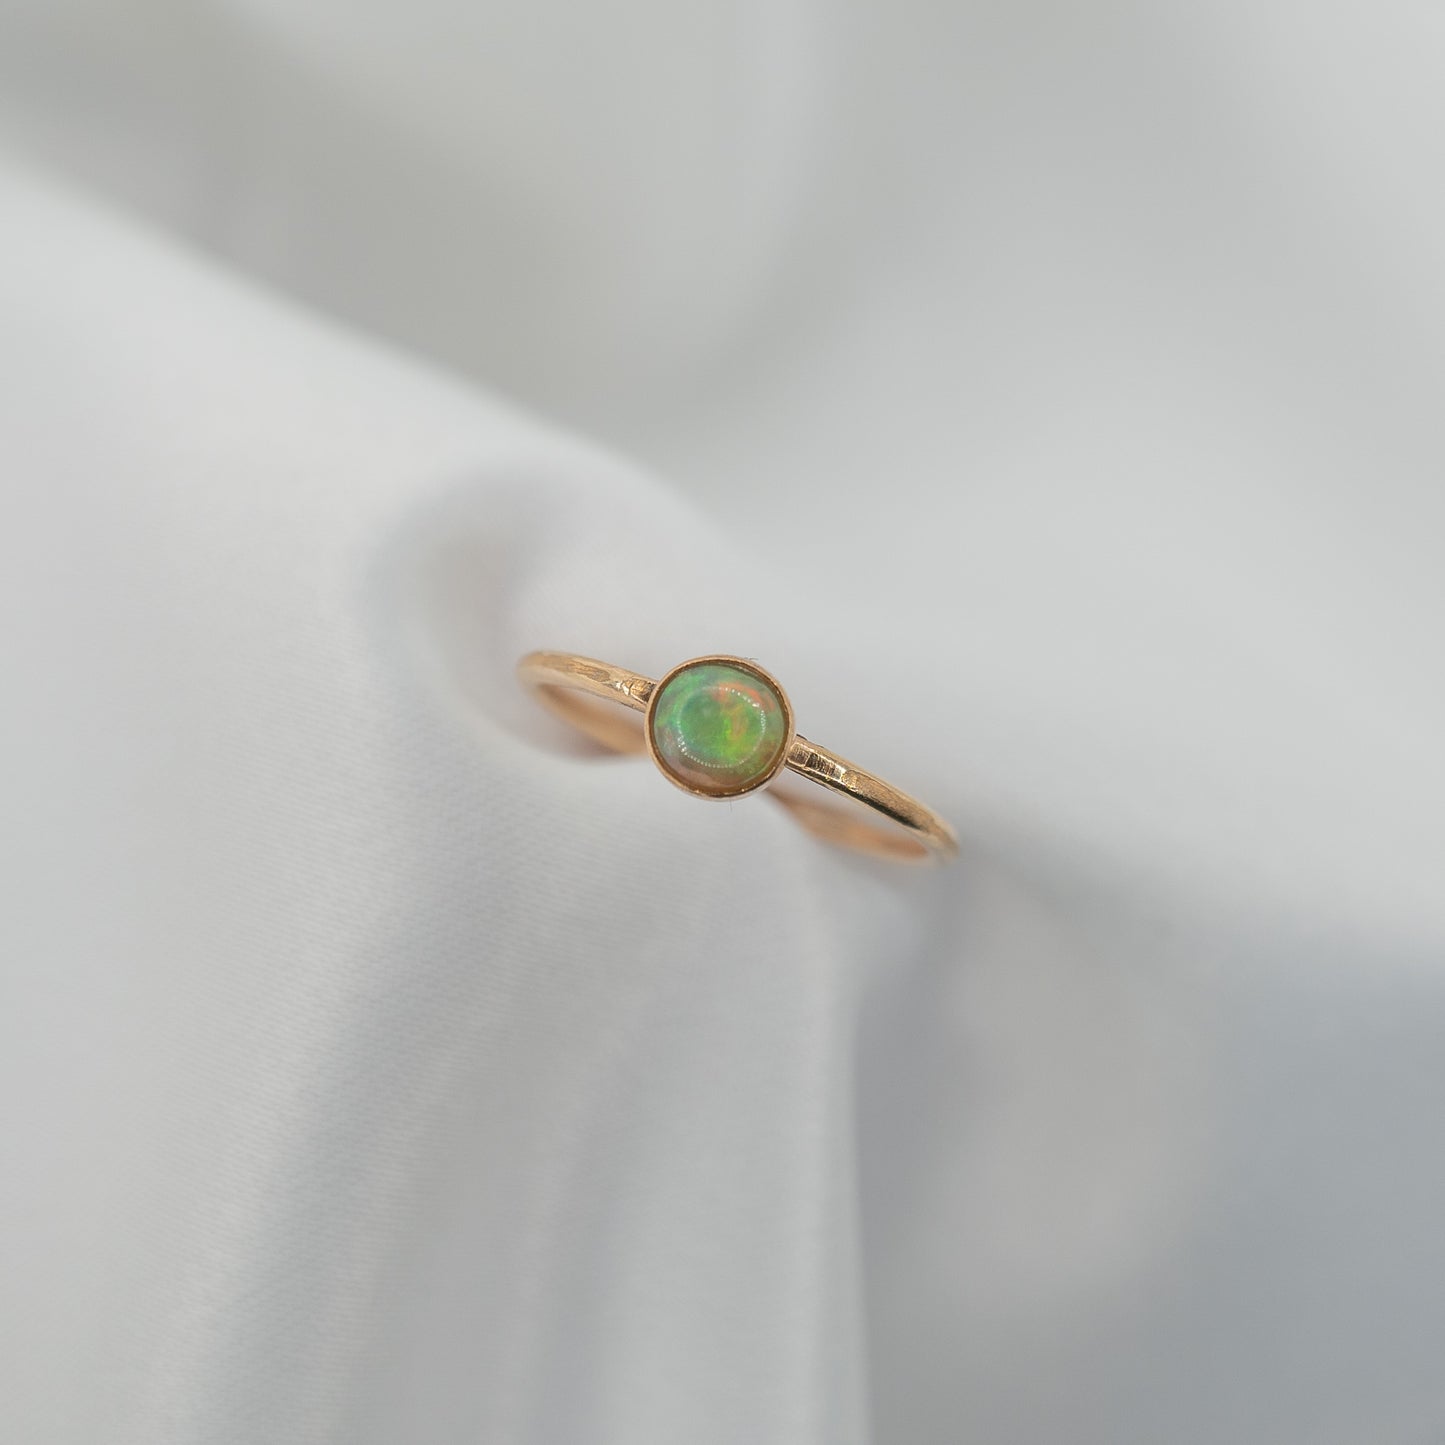 Gold Filled Opal Ring - shot on white - top down